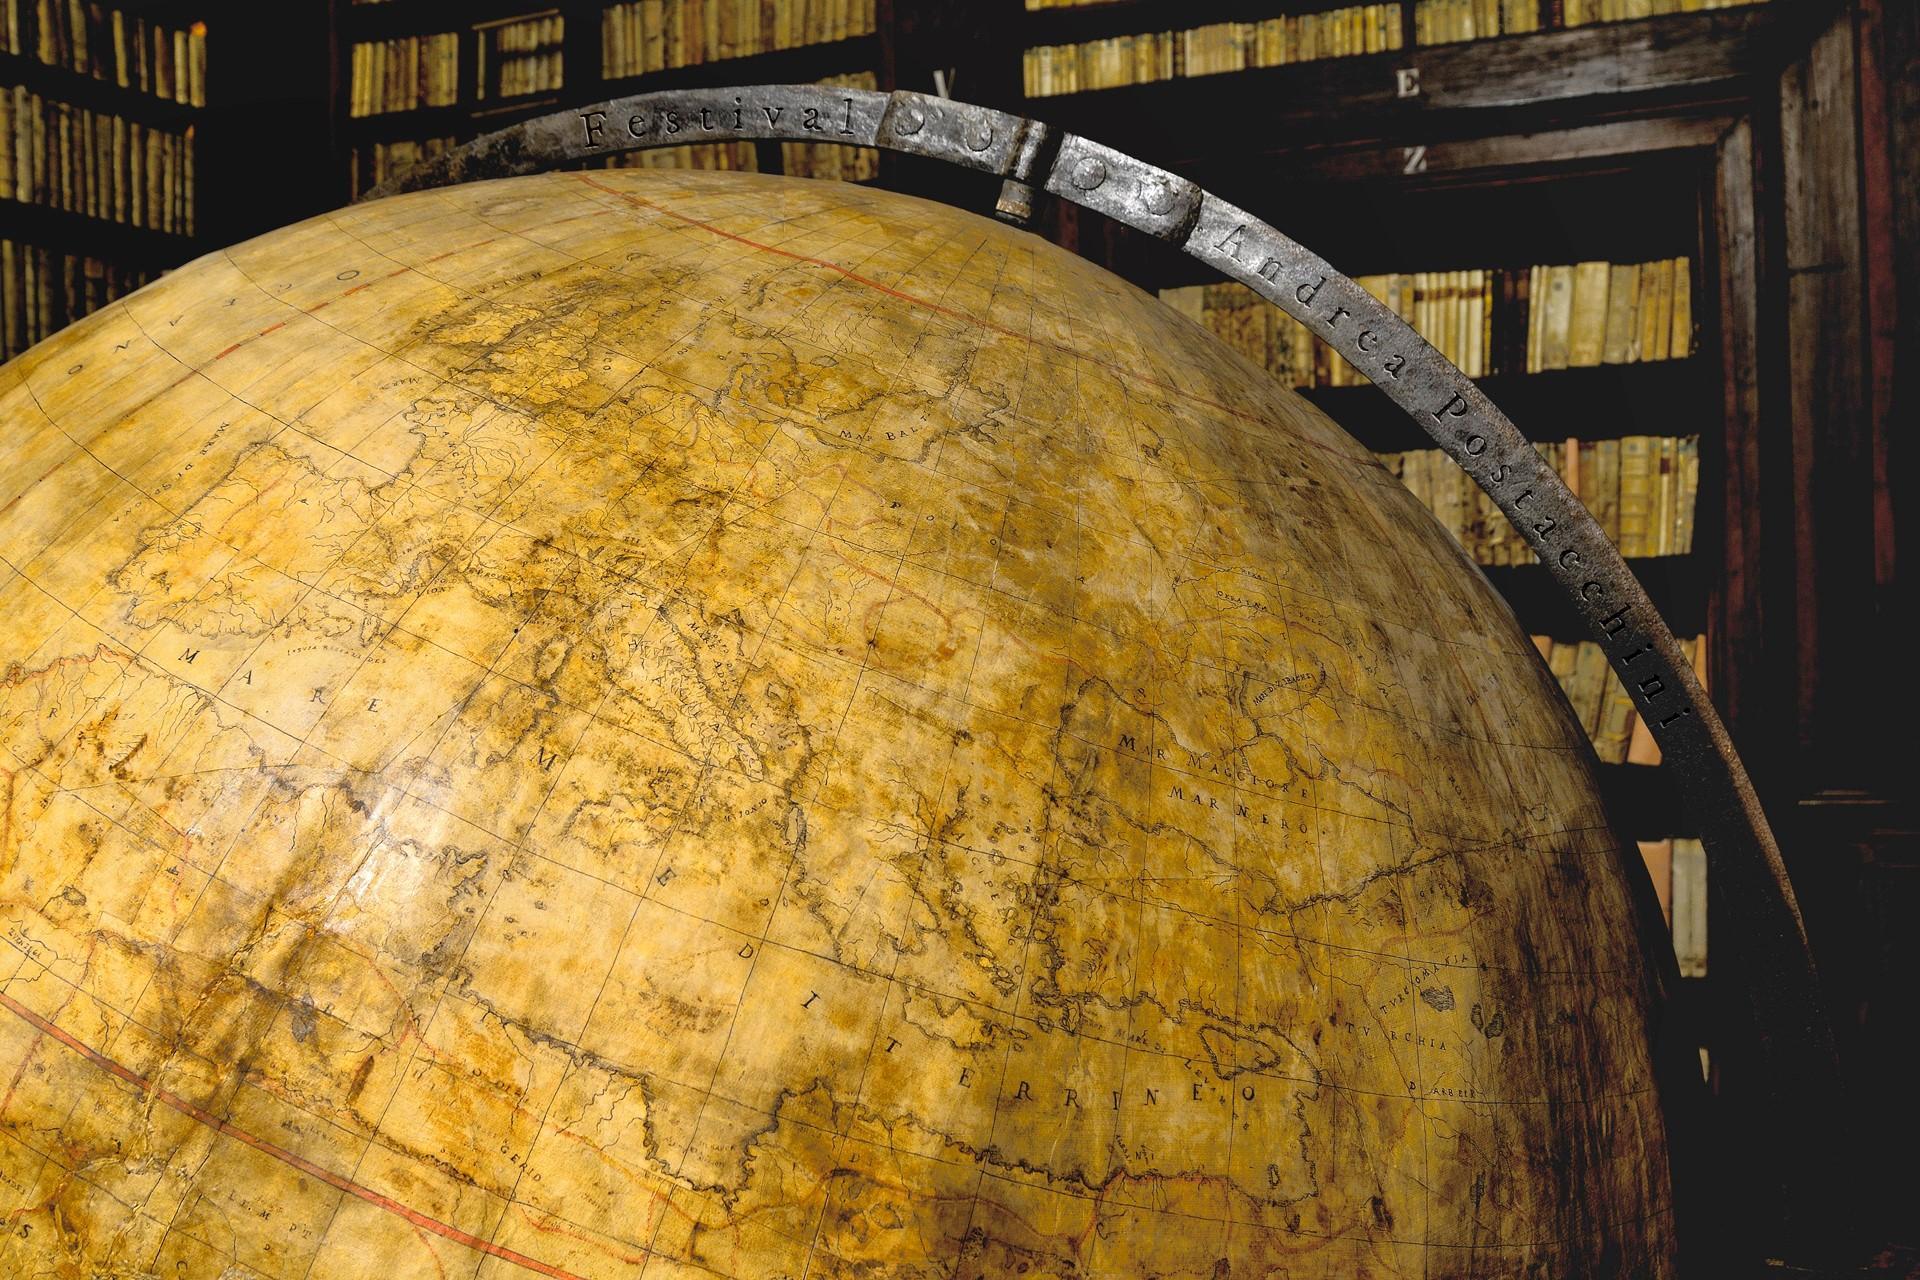 The (terrestrial) globe and Italy